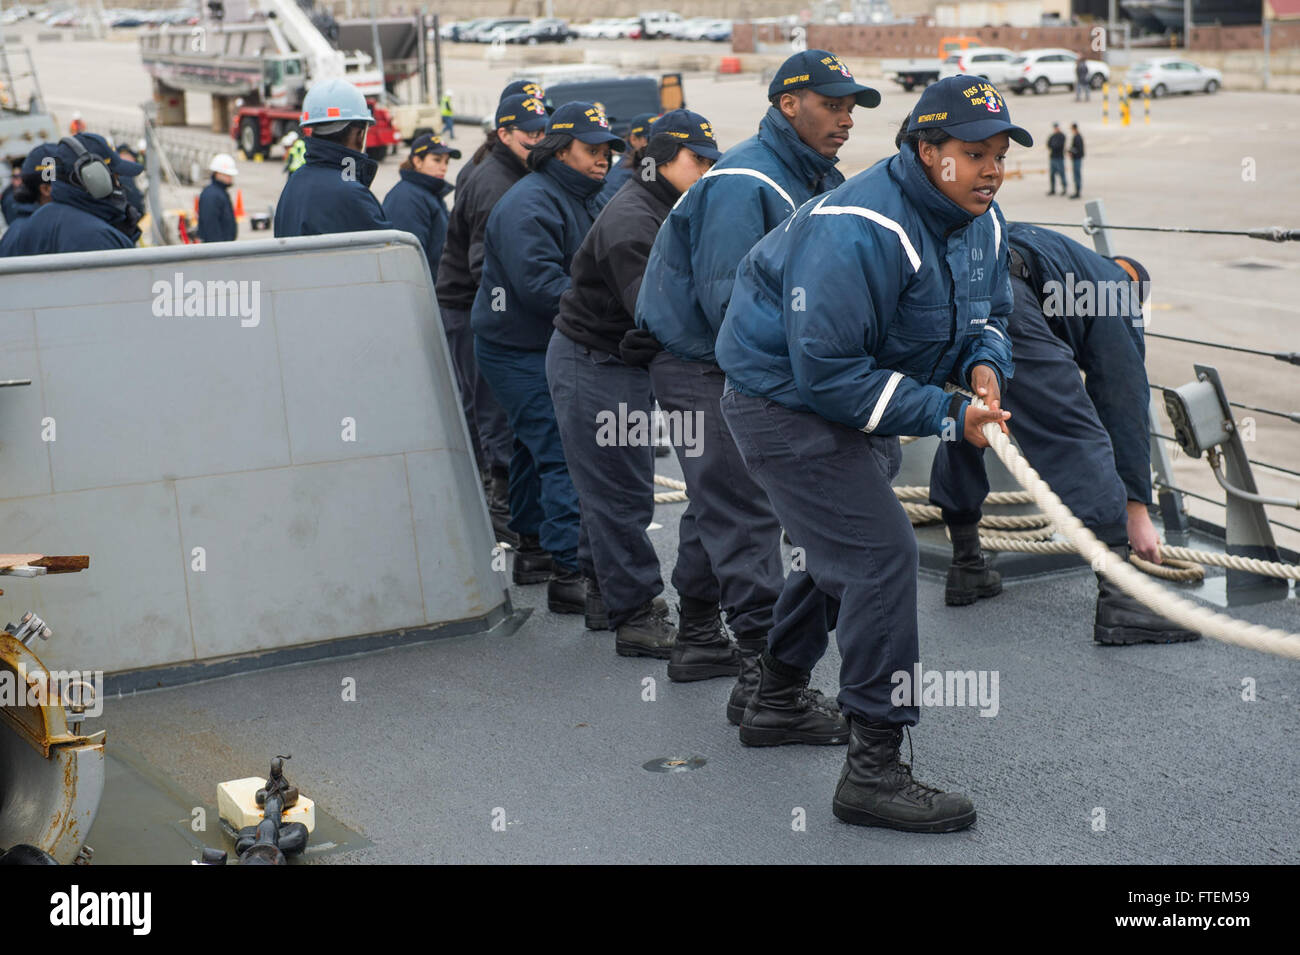 Spain (Feb. 23, 2015) Sailors aboard USS Laboon (DDG 58) heave around a mooring line while the ship moors atNaval Station Rota, Spain, Feb. 23, 2015. Laboon, an Arleigh Burke-class guided-missile destroyer, homeported in Norfolk, is conducting naval operations in the U.S. 6th Fleet area of operations in support of U.S. national security interests in Europe. Stock Photo